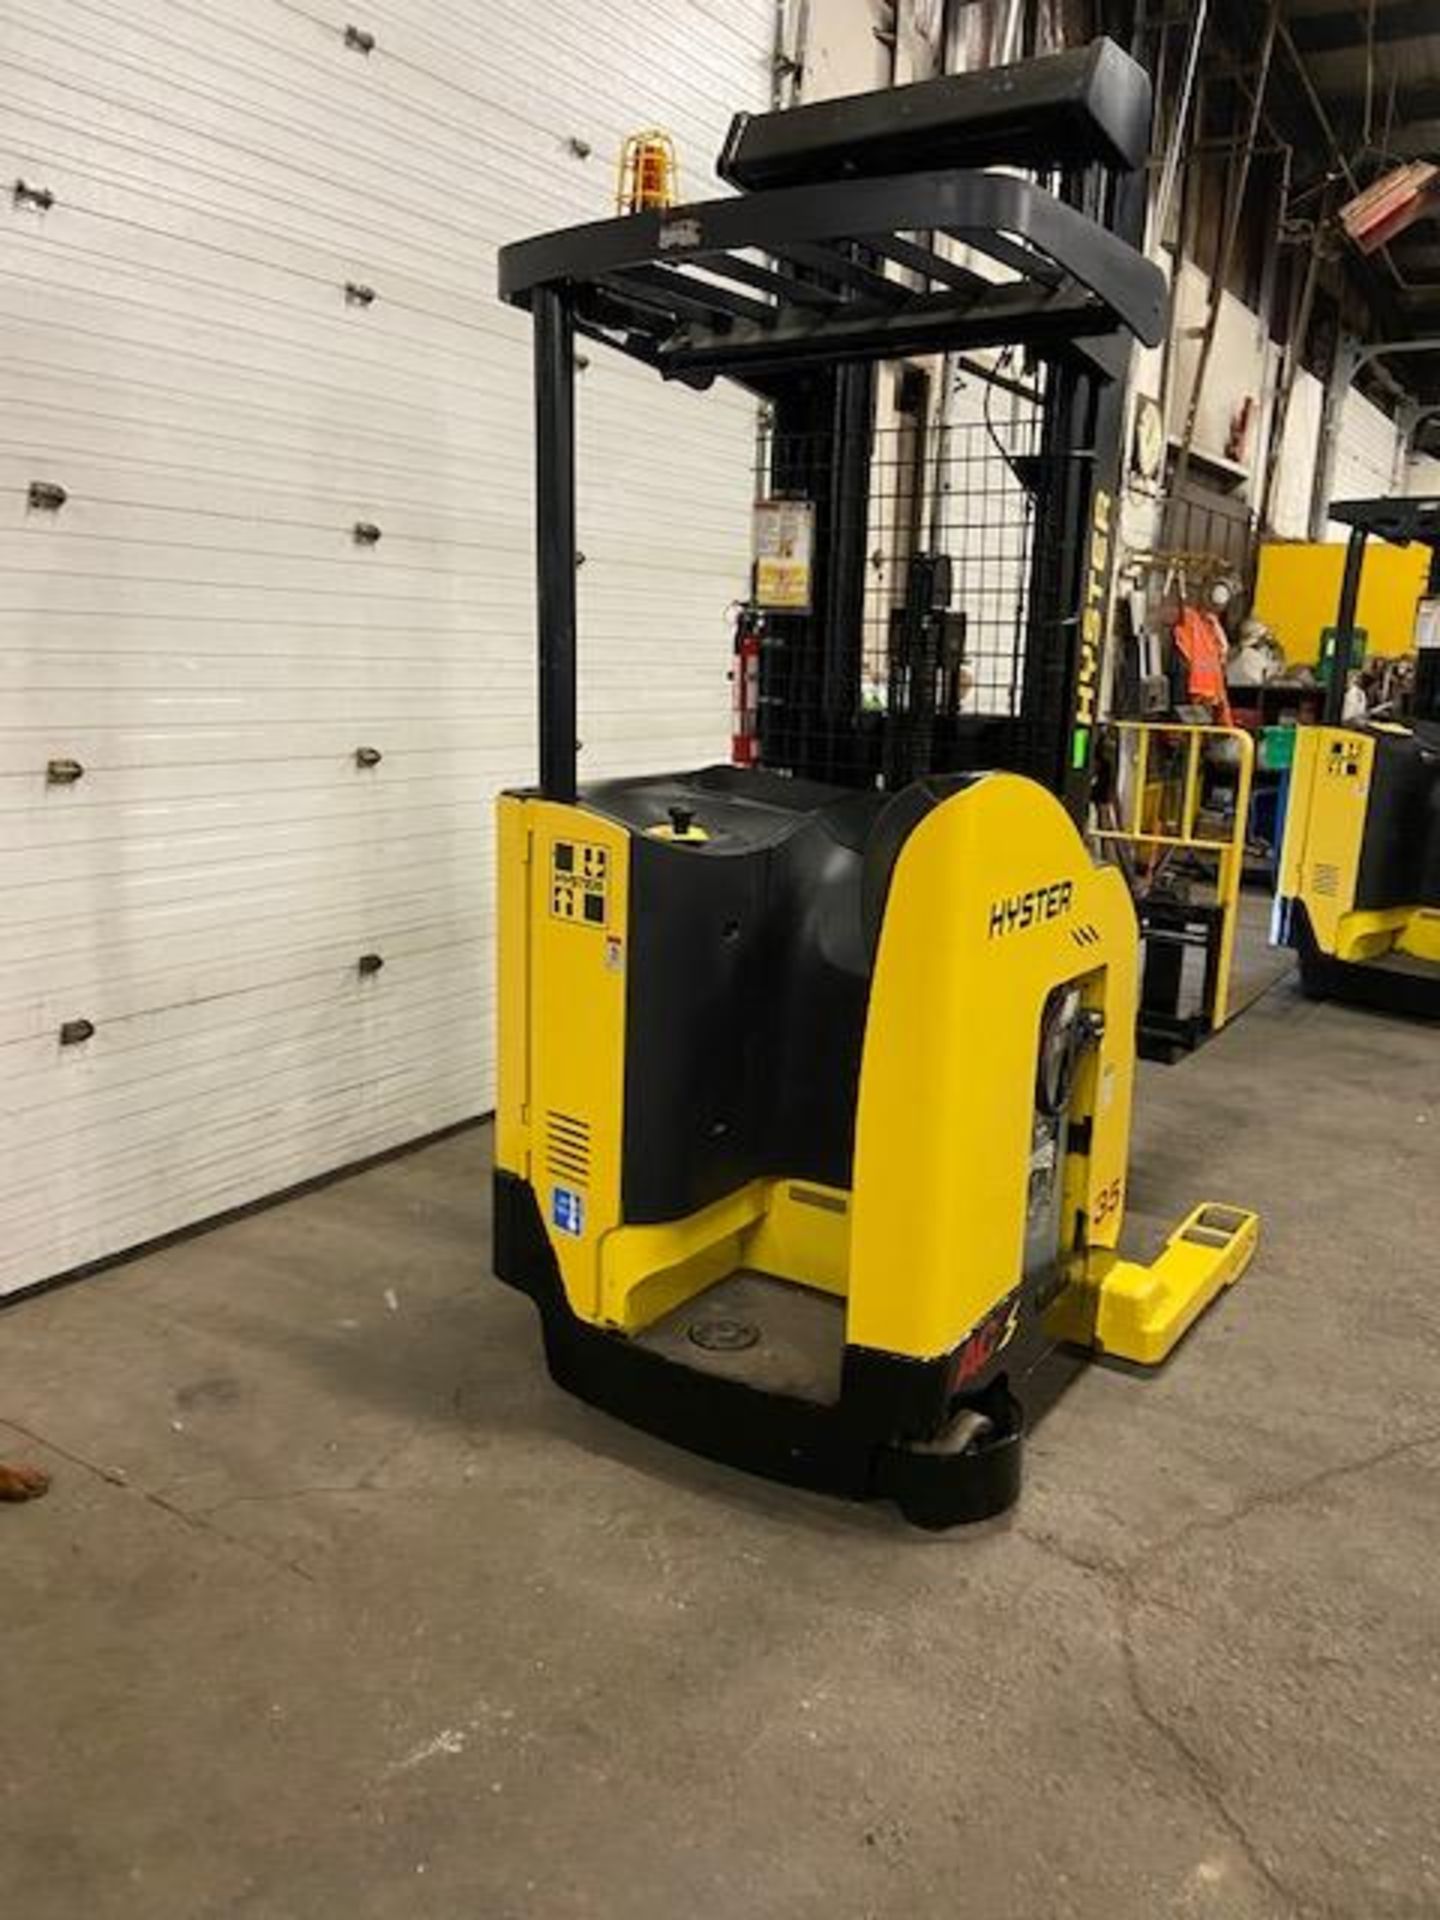 FREE CUSTOMS - 2012 Hyster Reach Truck Pallet Lifter REACH TRUCK electric 3500lbs with sideshift 3- - Image 2 of 3